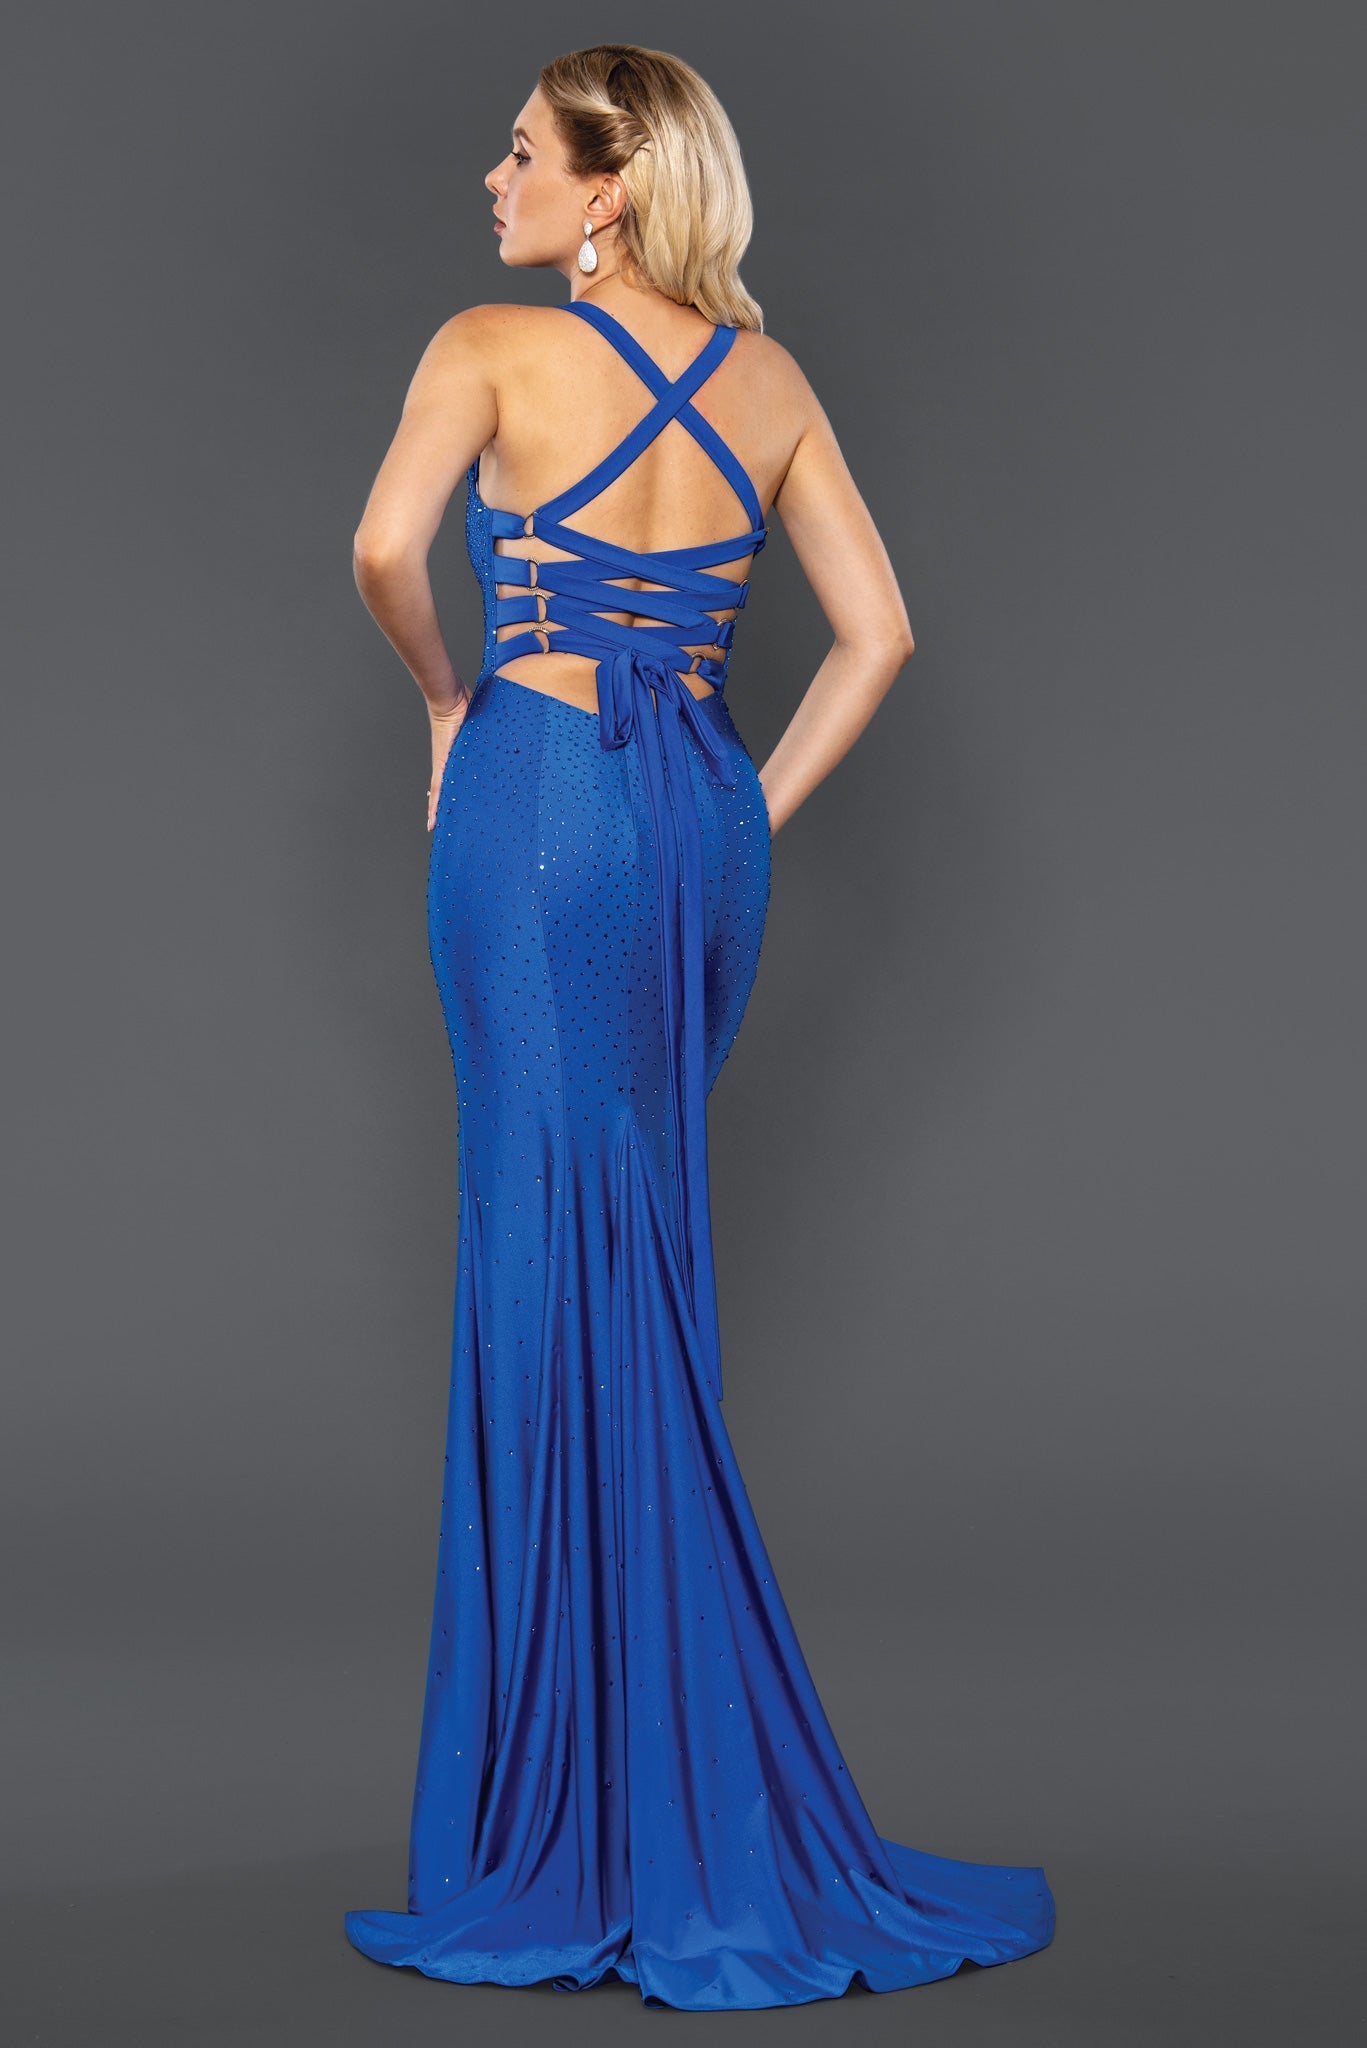 Stella Couture 22072 Long Fitted Lace Up Slit Backless Prom Dress Formal Gown size 2 Royal